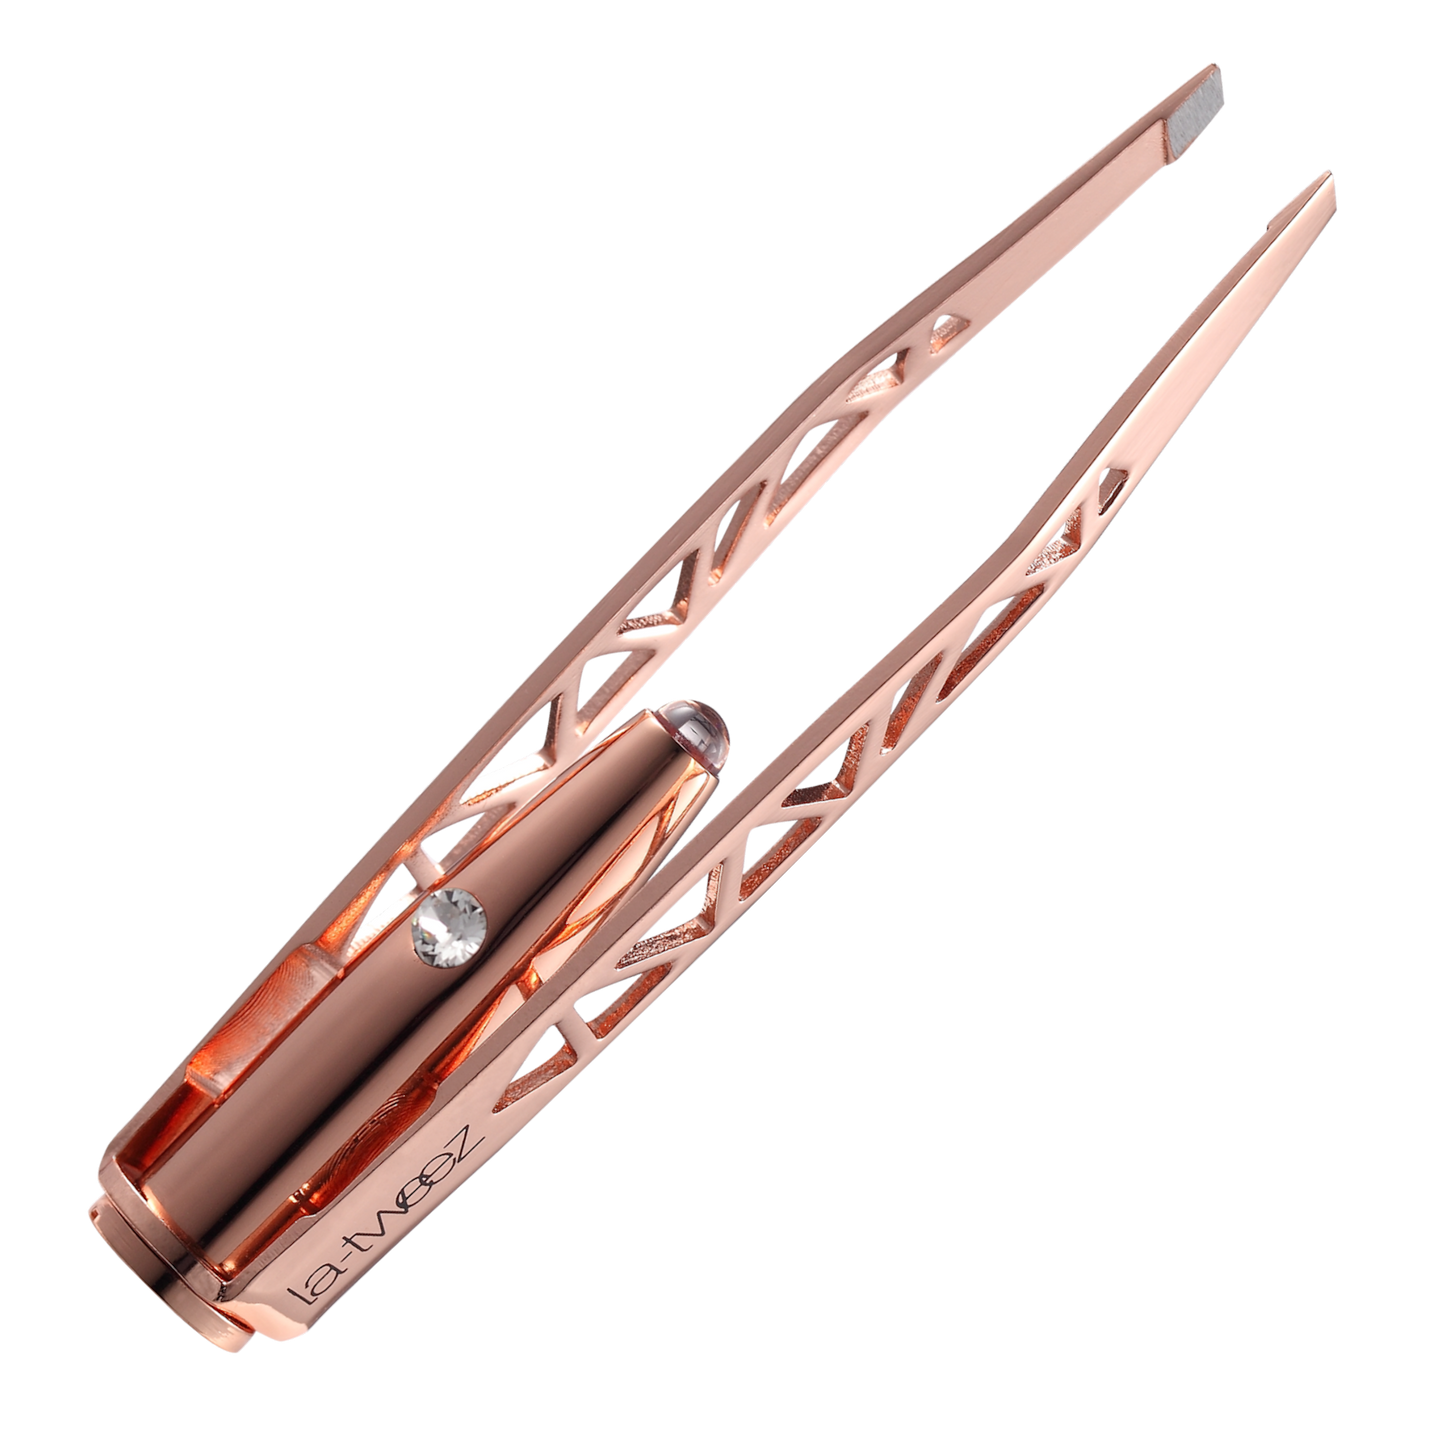 As the ORIGINAL inventors of the illuminating tweezers, nobody does it better than La-tweez! The patented LED light is a signature of La-tweez products proving you with the necessary light to tweeze anywhere and everywhere! See the range at latweez.co.uk including this version in ROSE GOLD from https://alida.co.uk/collections/la-tweez